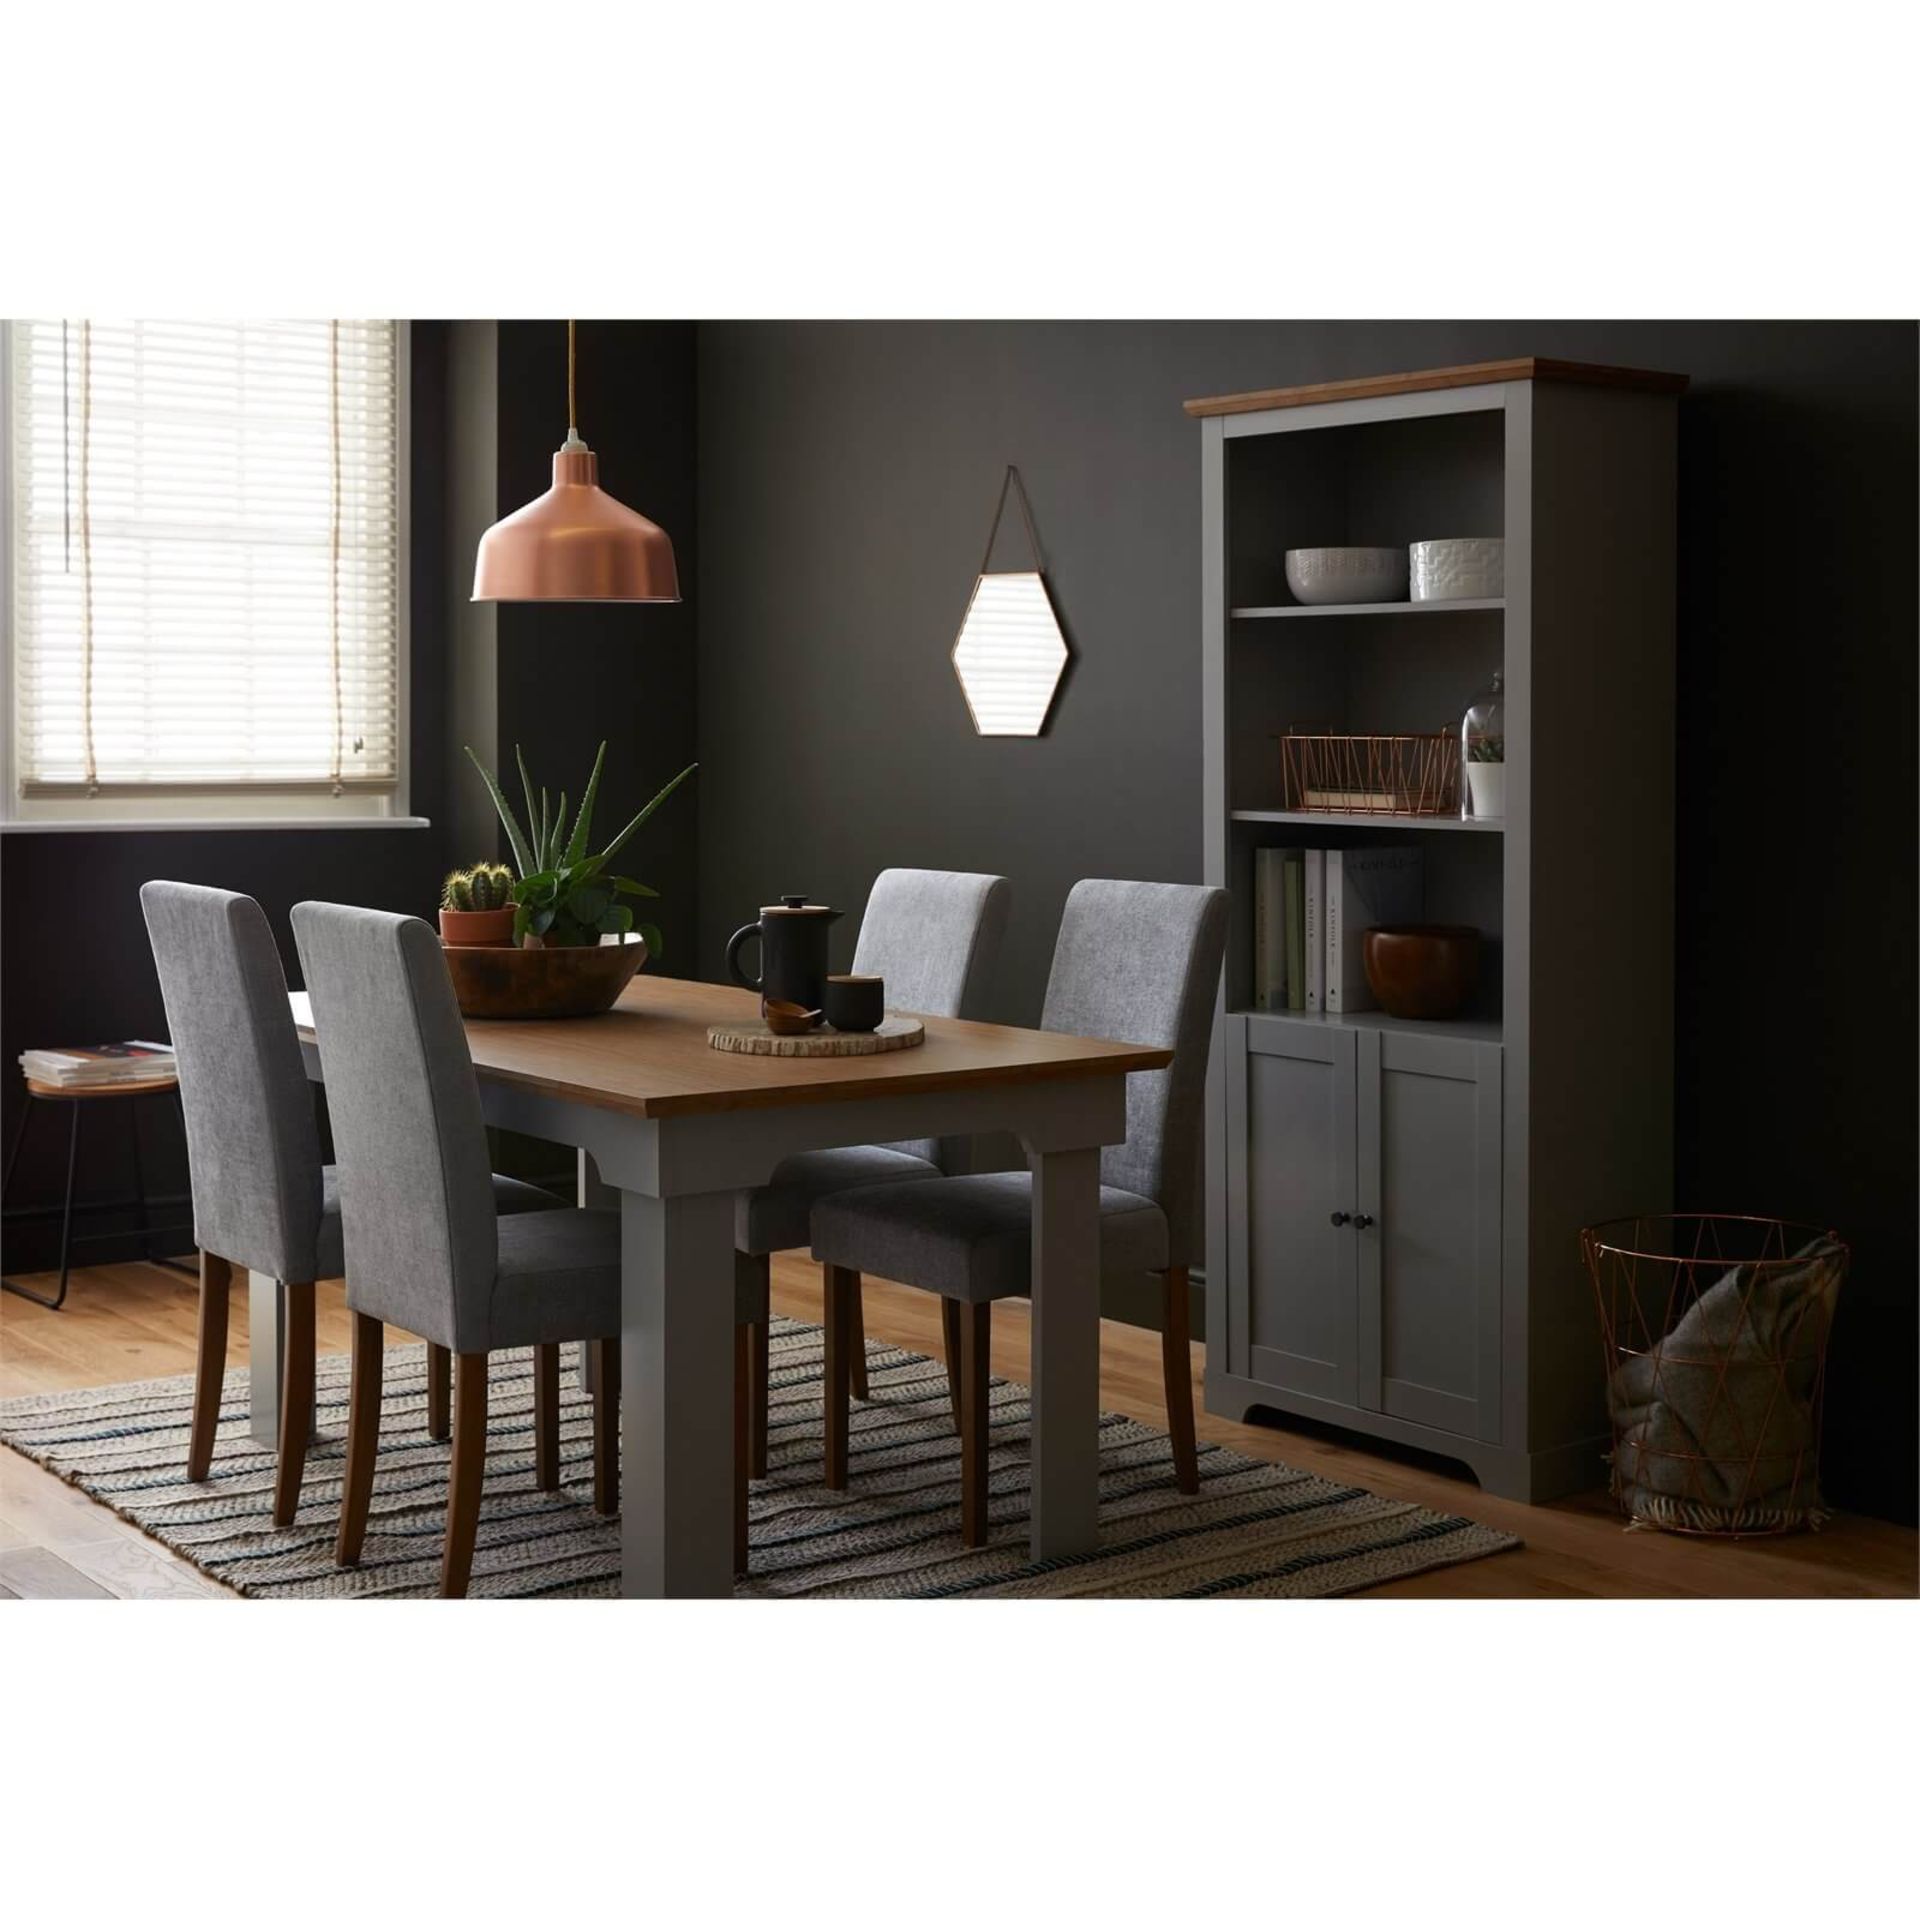 (R7D) 4 X Diva Dining Chairs. Grey Upholstered Seats. Solid Rubberwood Legs. RRP £250